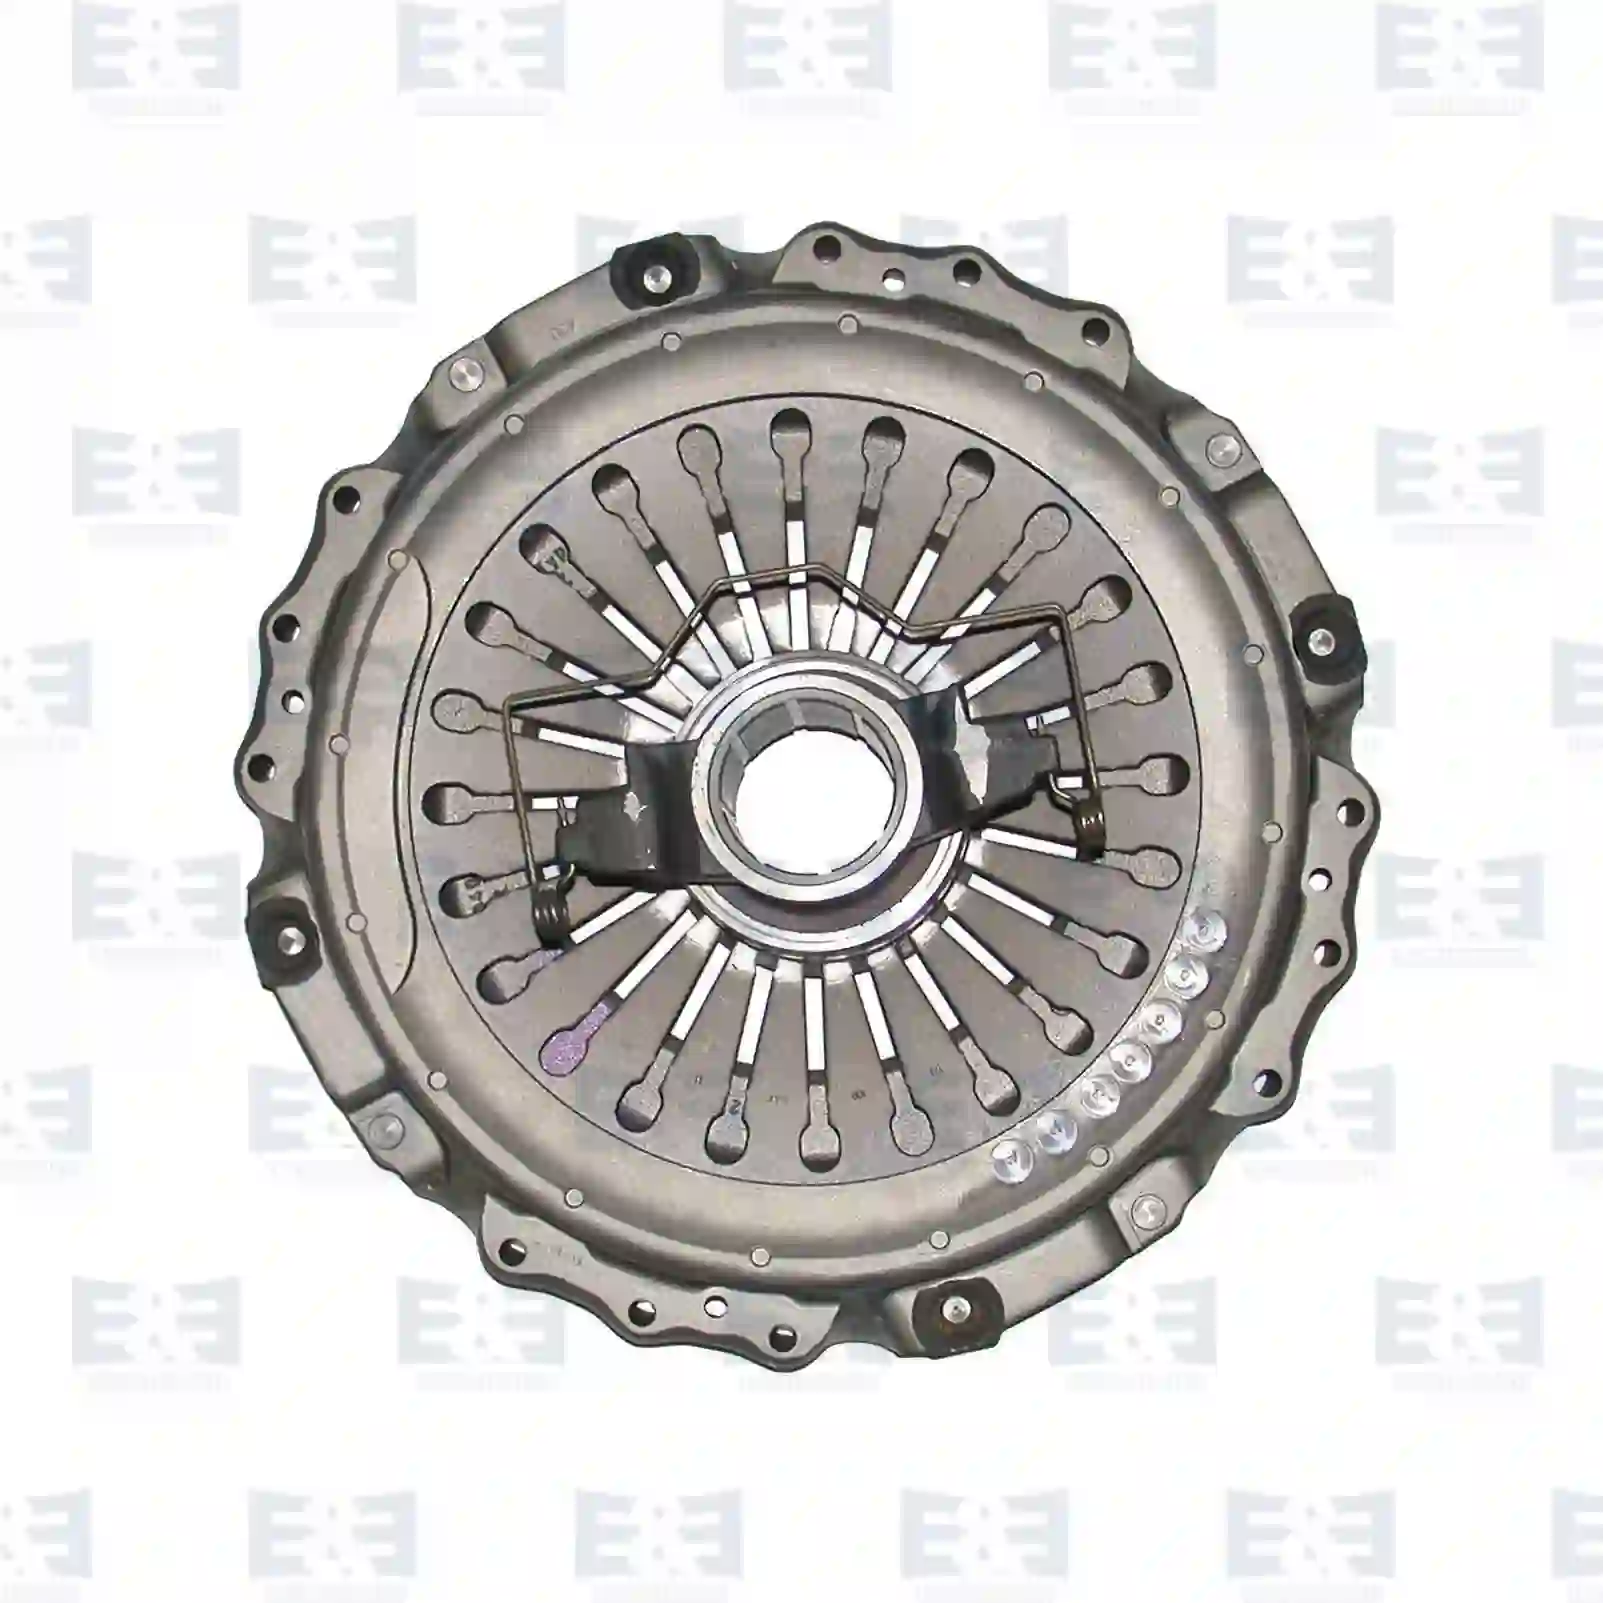 Clutch cover, with release bearing, 2E2288846, 1521712, 20569128, 3192201, 8113512, 8116512, 8119512, 85000521 ||  2E2288846 E&E Truck Spare Parts | Truck Spare Parts, Auotomotive Spare Parts Clutch cover, with release bearing, 2E2288846, 1521712, 20569128, 3192201, 8113512, 8116512, 8119512, 85000521 ||  2E2288846 E&E Truck Spare Parts | Truck Spare Parts, Auotomotive Spare Parts